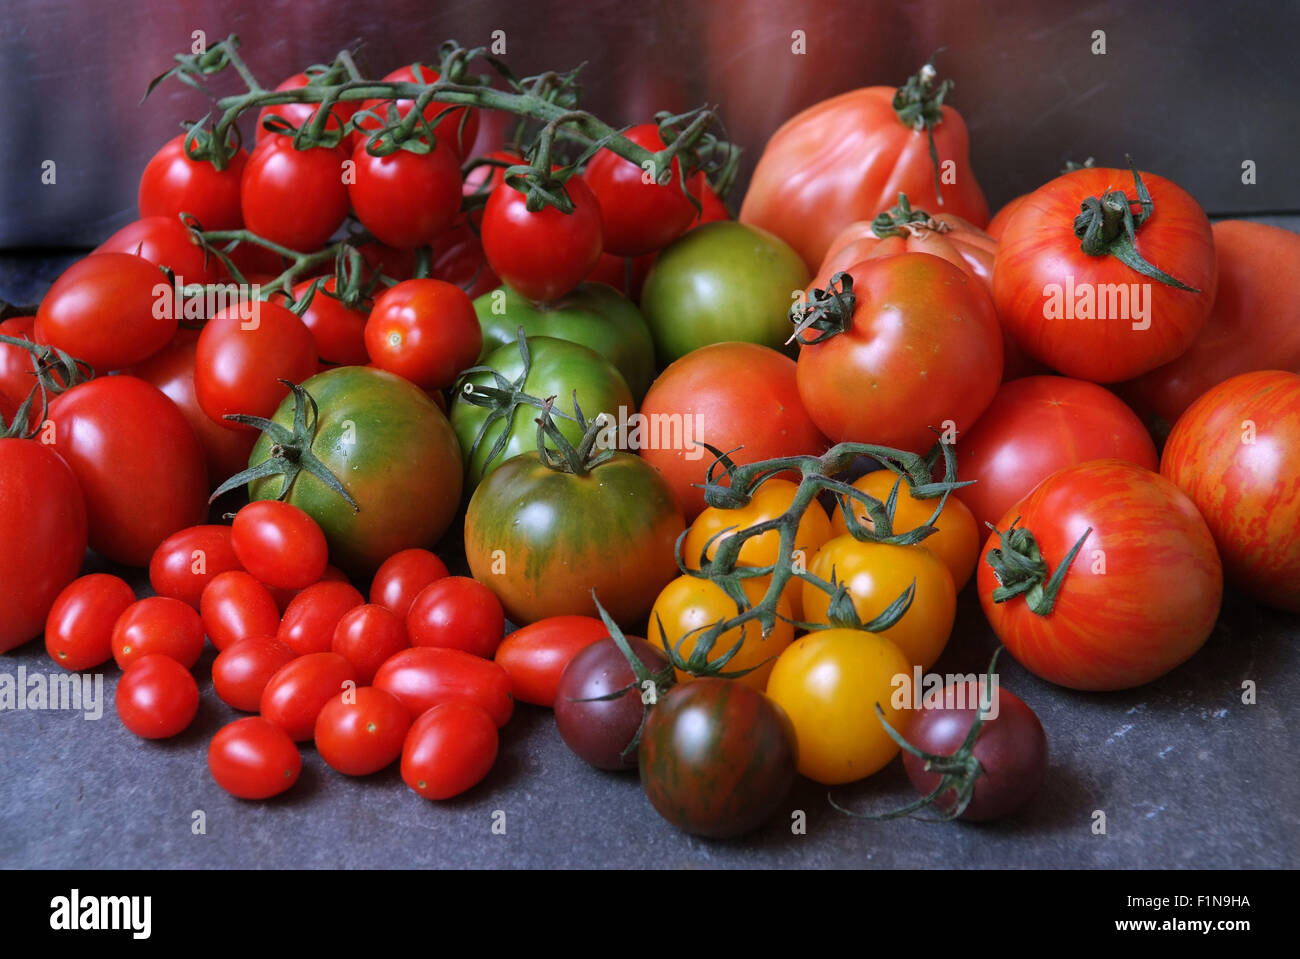 Tomatoes of different colours Stock Photo